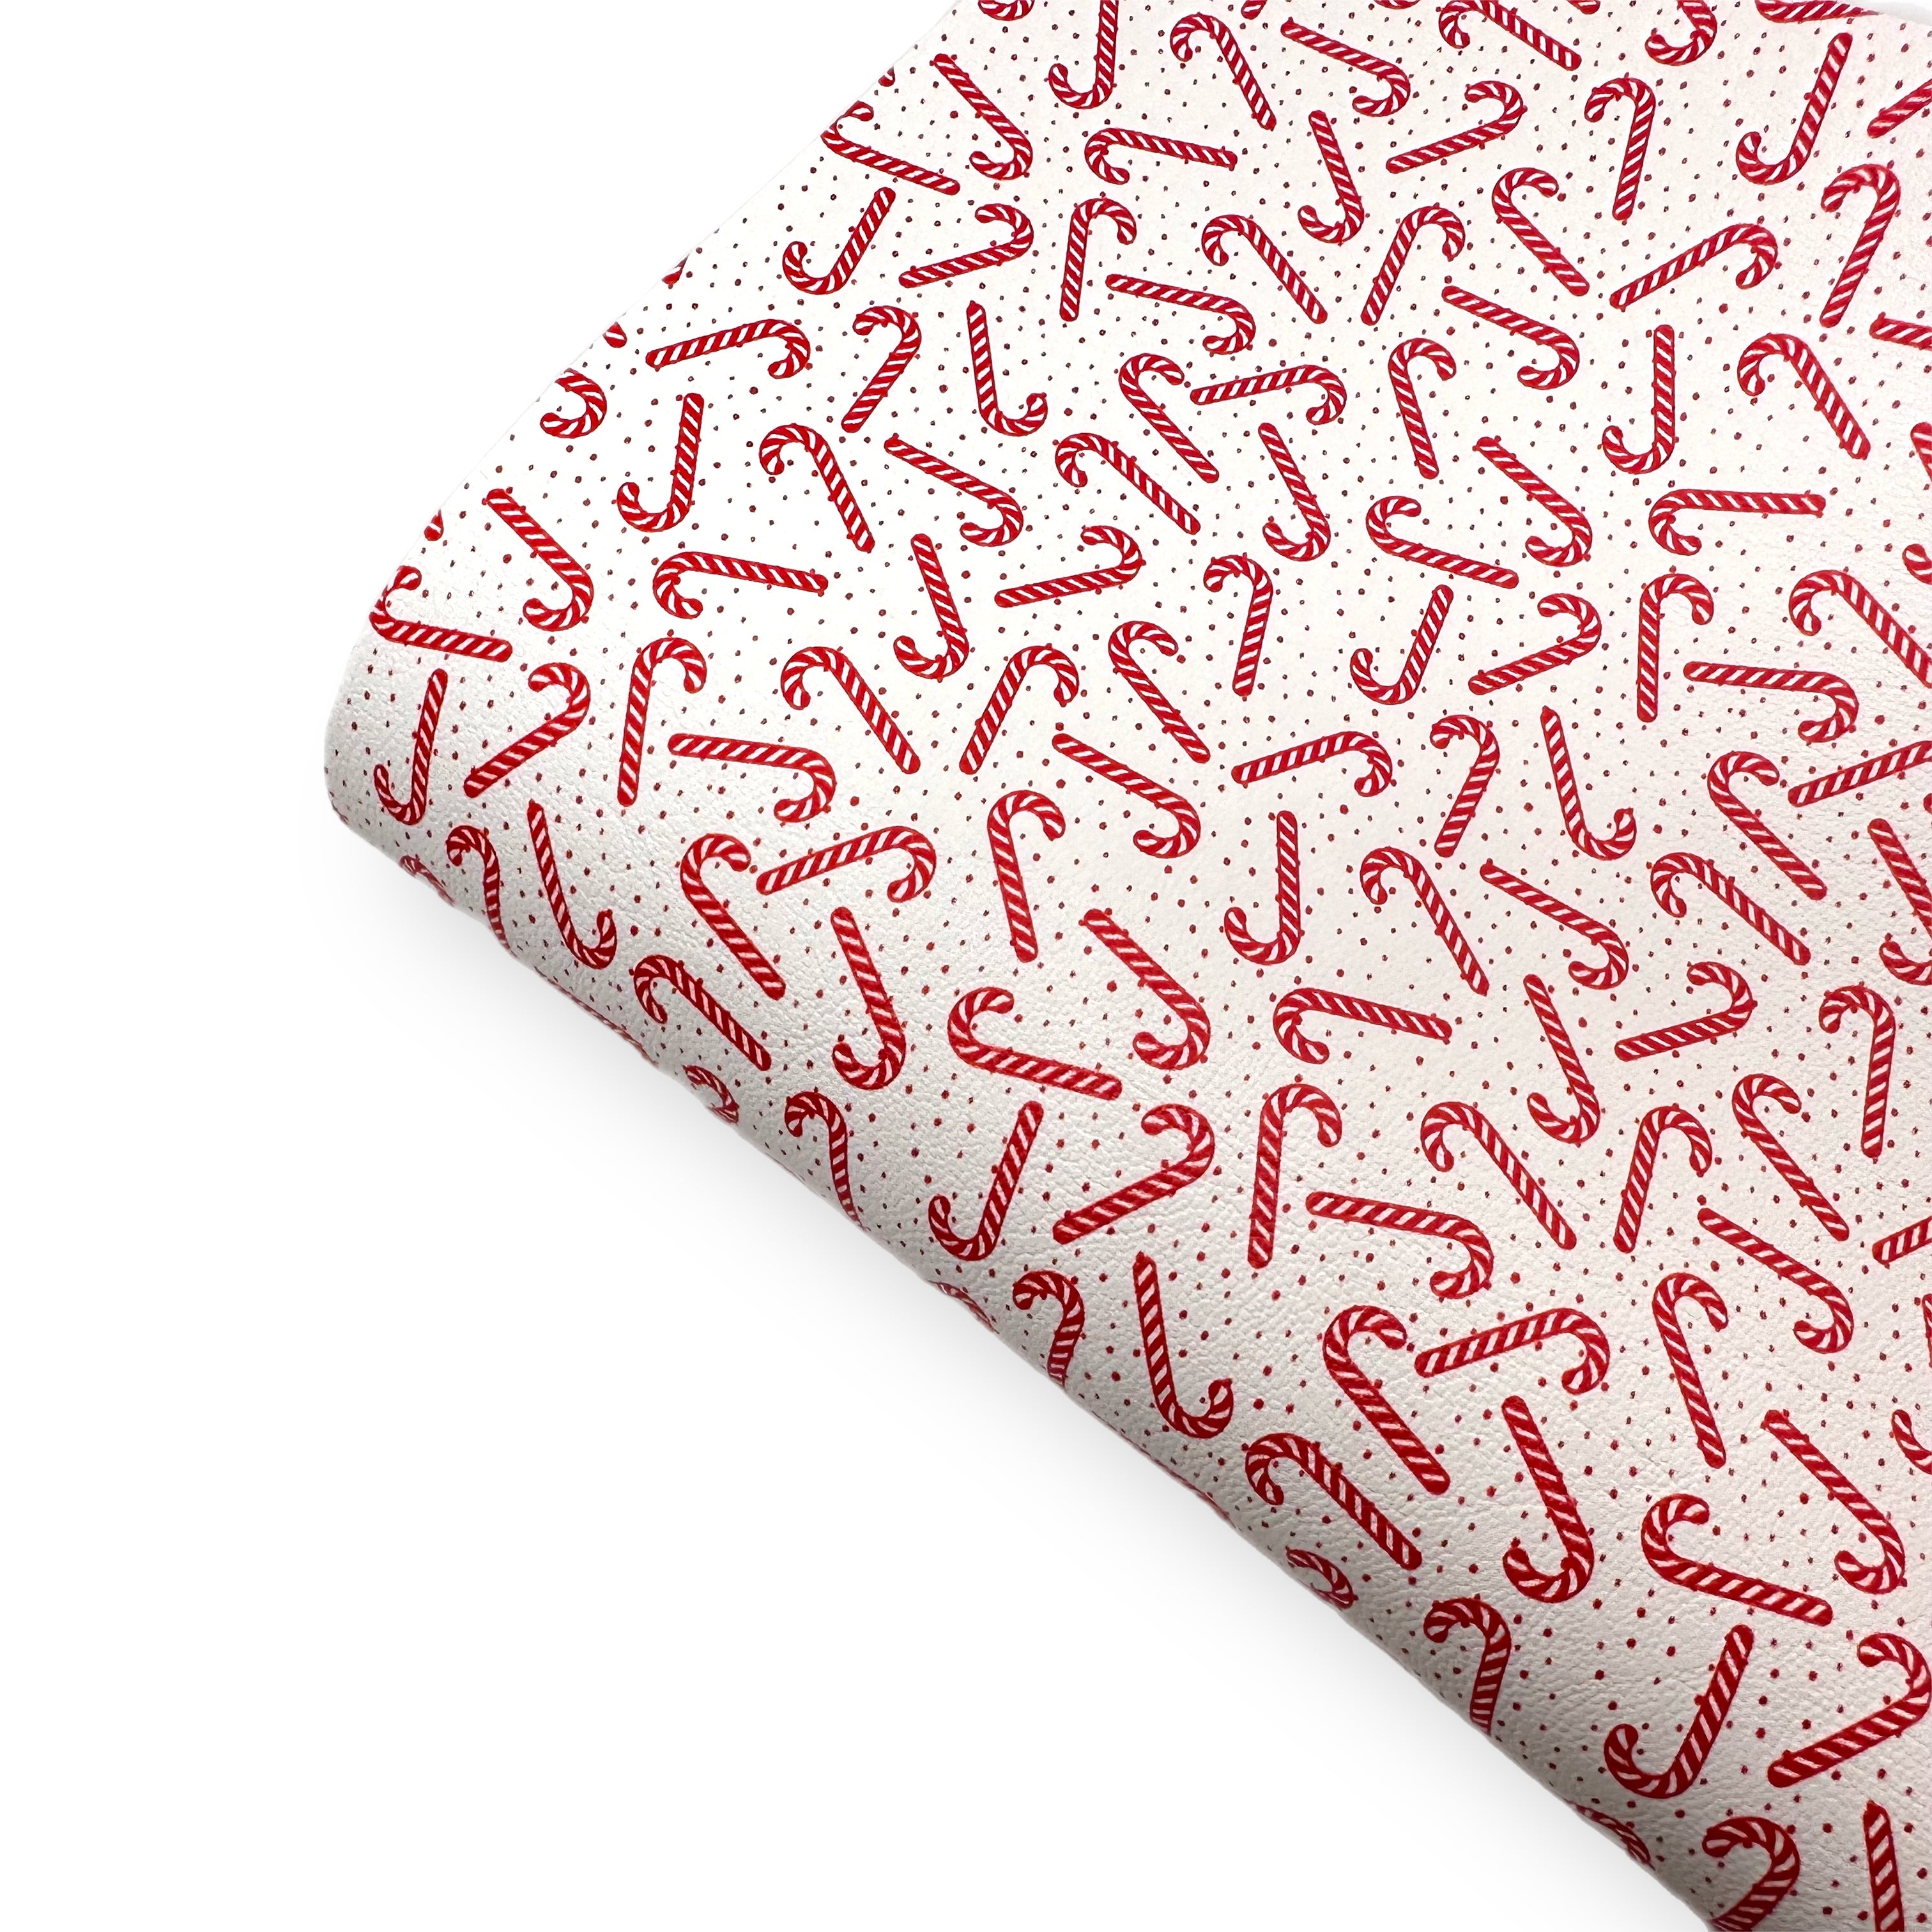 Sweet Candy Cane Premium Faux Leather Fabric Sheets